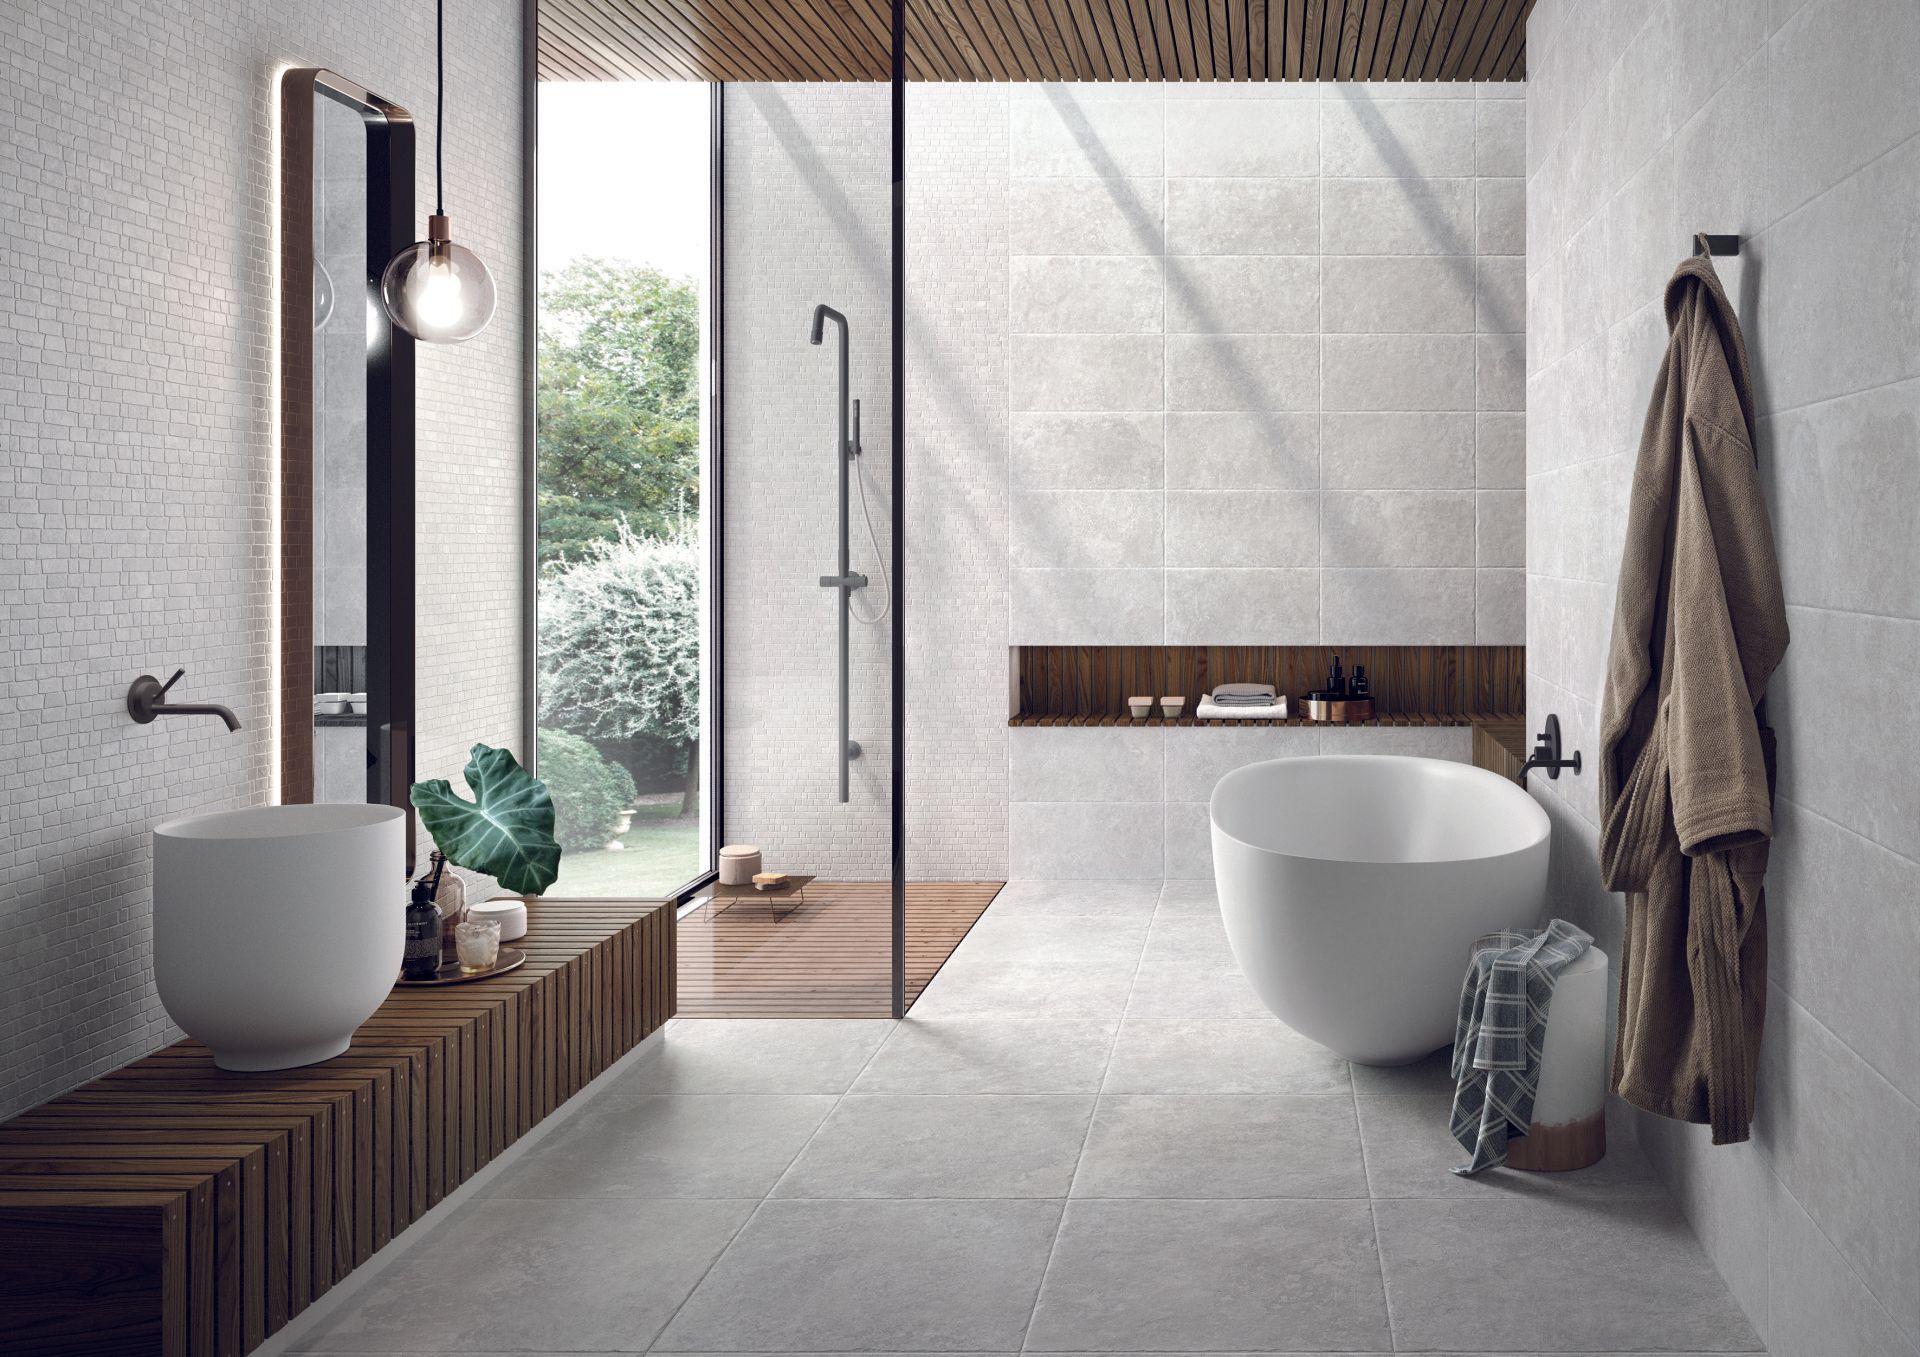 limestone effect tiles used in a minimalistic bathroom design with wood accents